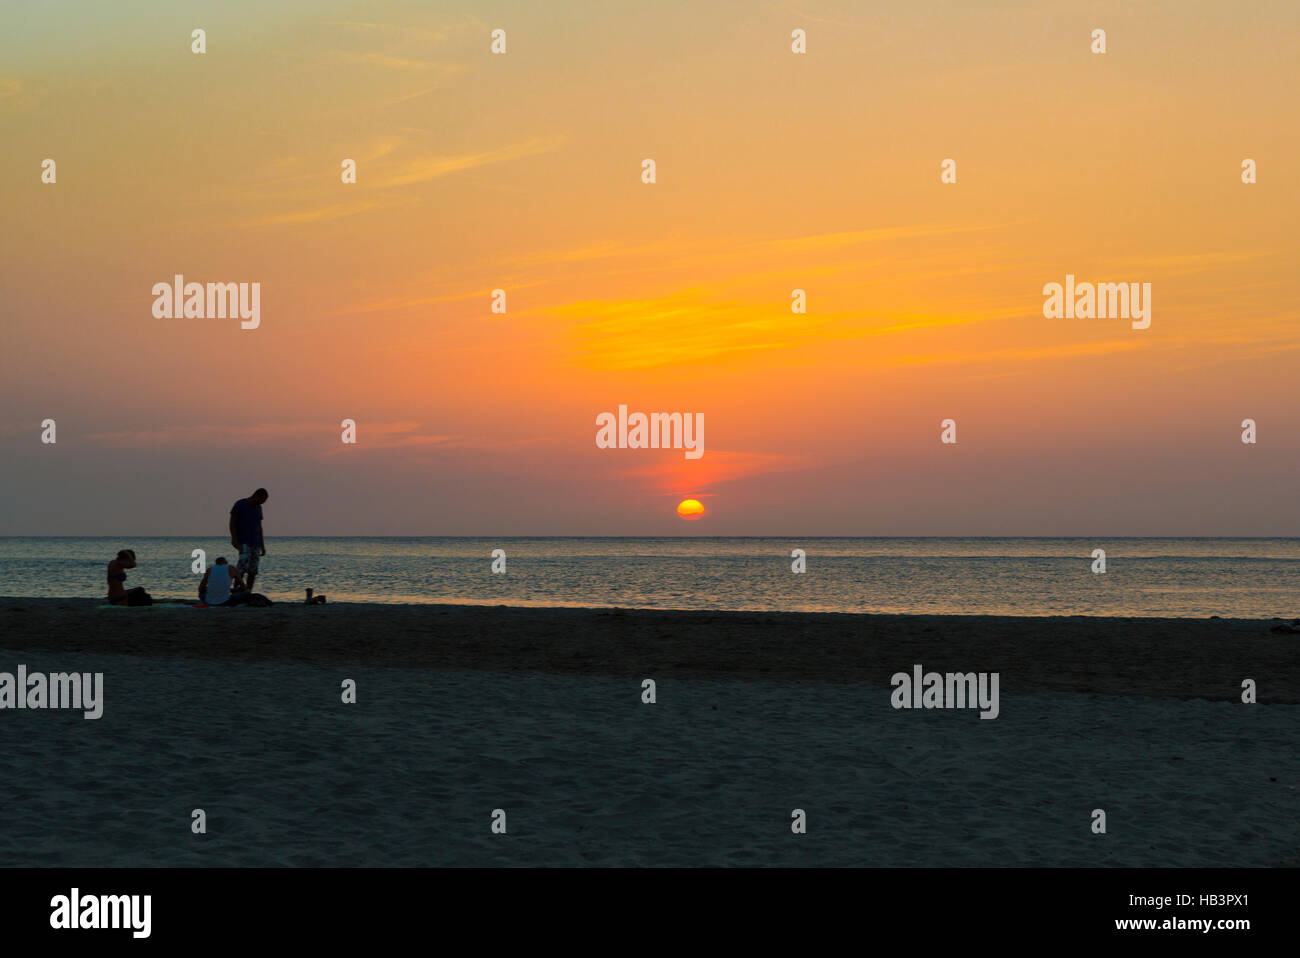 Group of people on a beach during sunset in Colombia Stock Photo